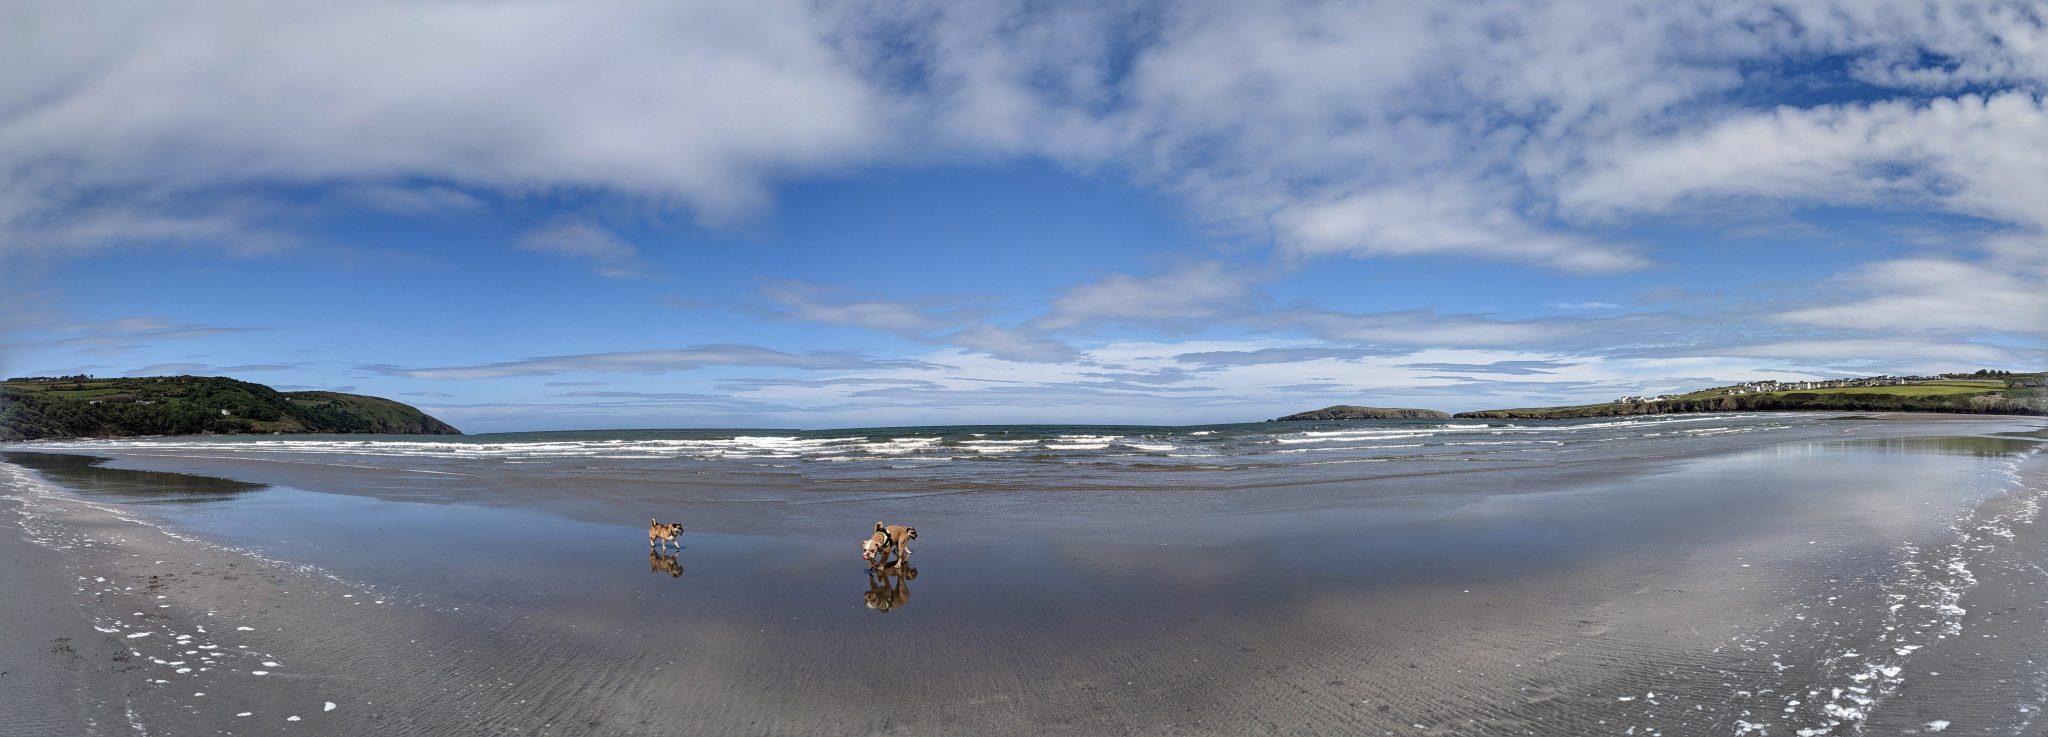 Pamoramic view of Poppit Sands beach in West Wales